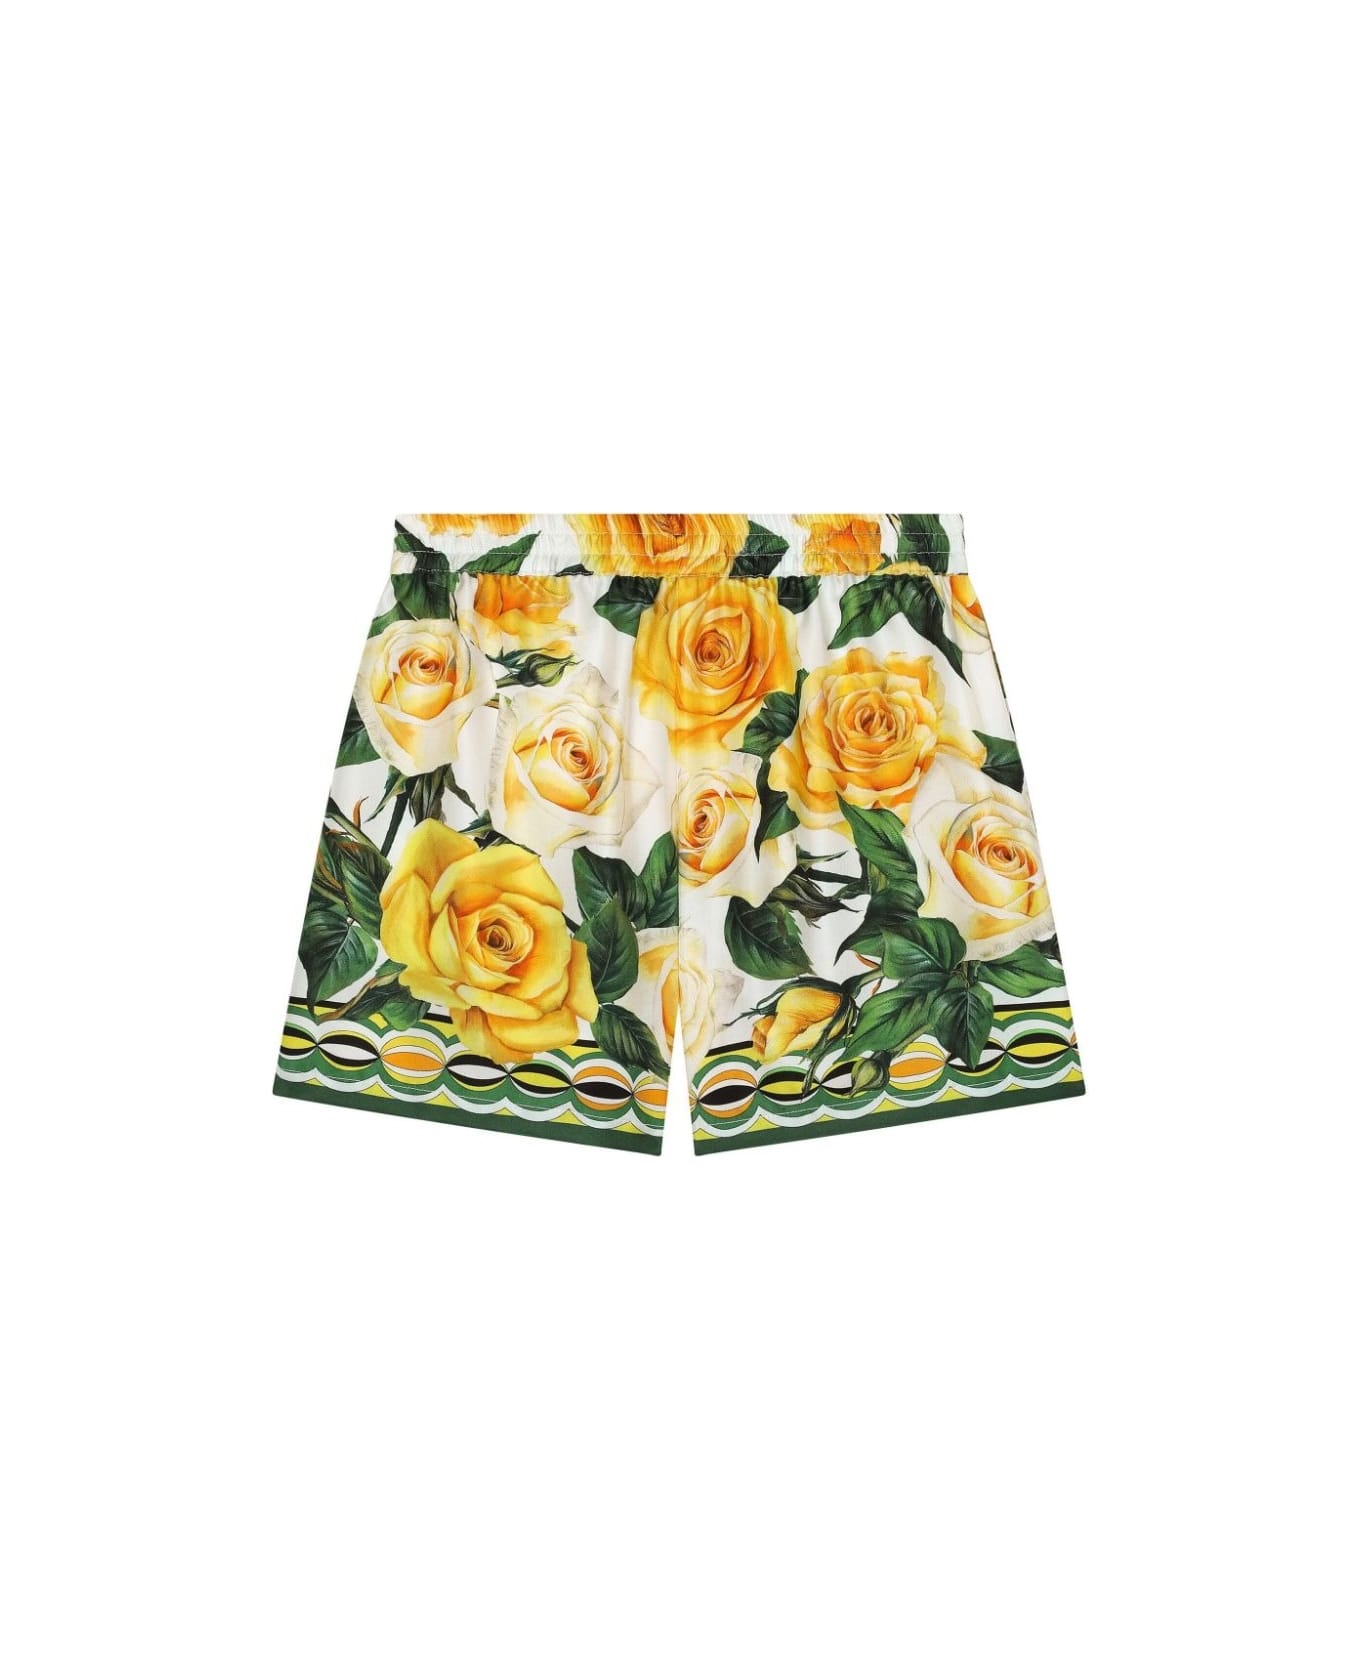 Dolce Small & Gabbana Twill Shorts With Yellow Rose Print - White